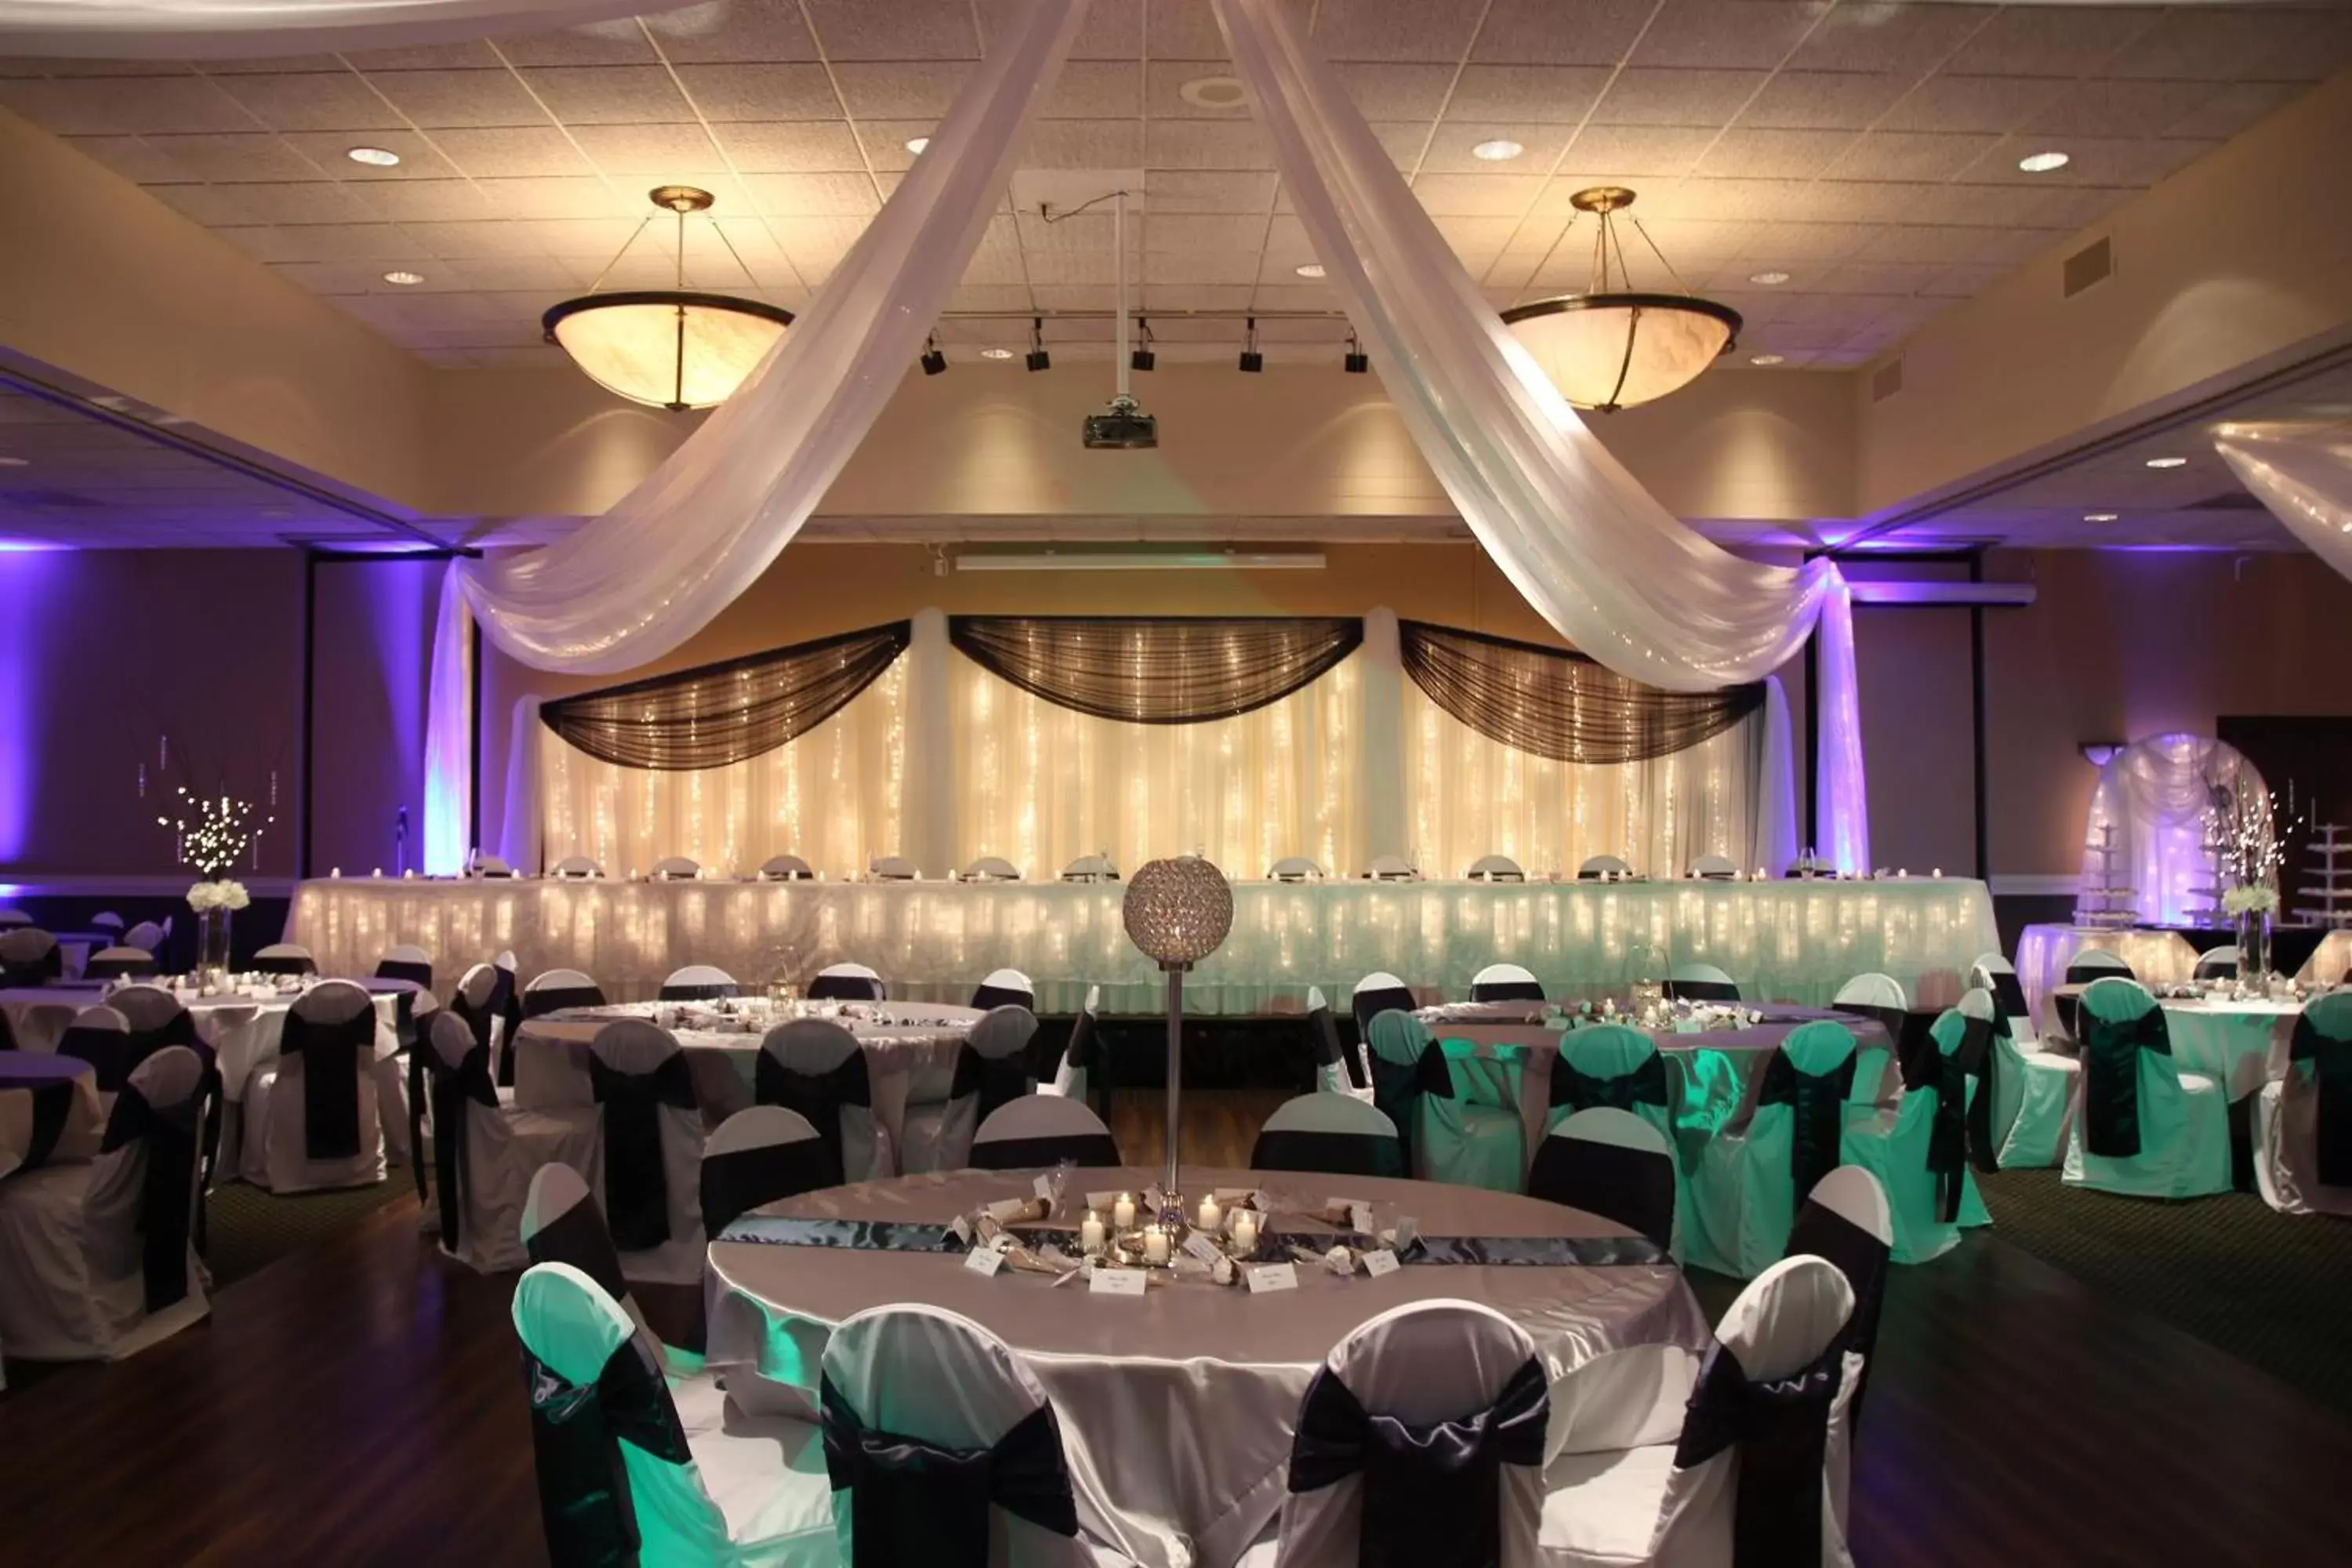 Banquet/Function facilities, Banquet Facilities in Best Western Plus Kelly Inn